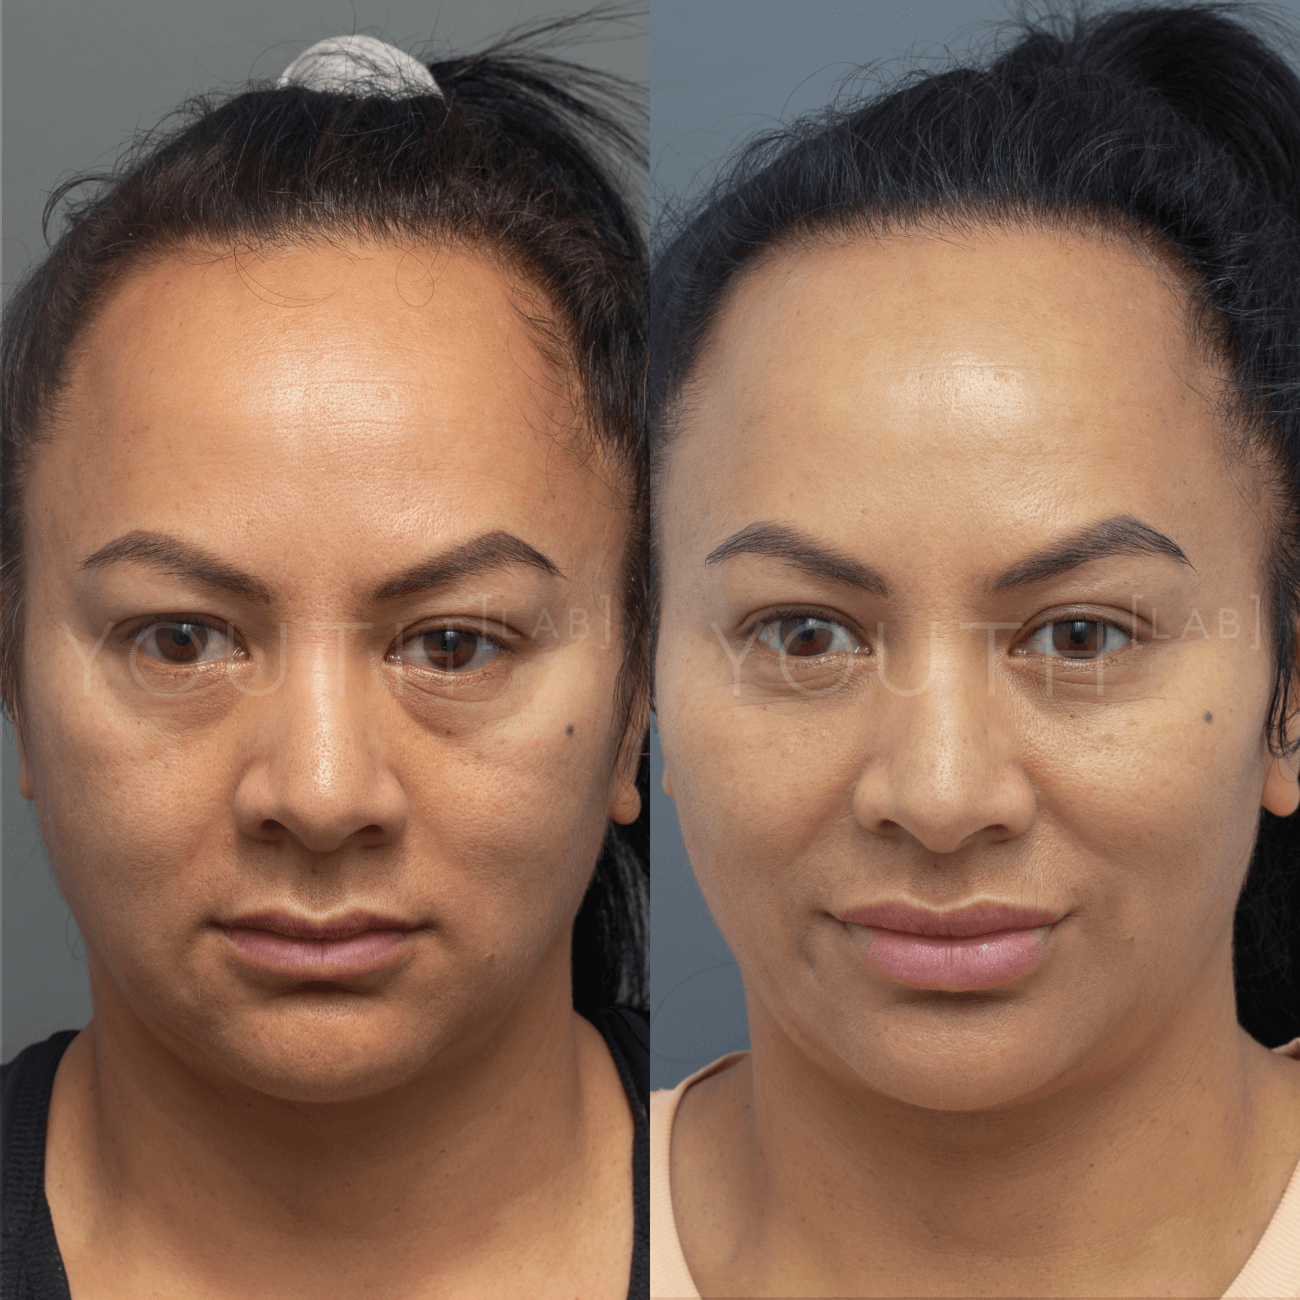 A dermal filler before and after by Nurse Danae 